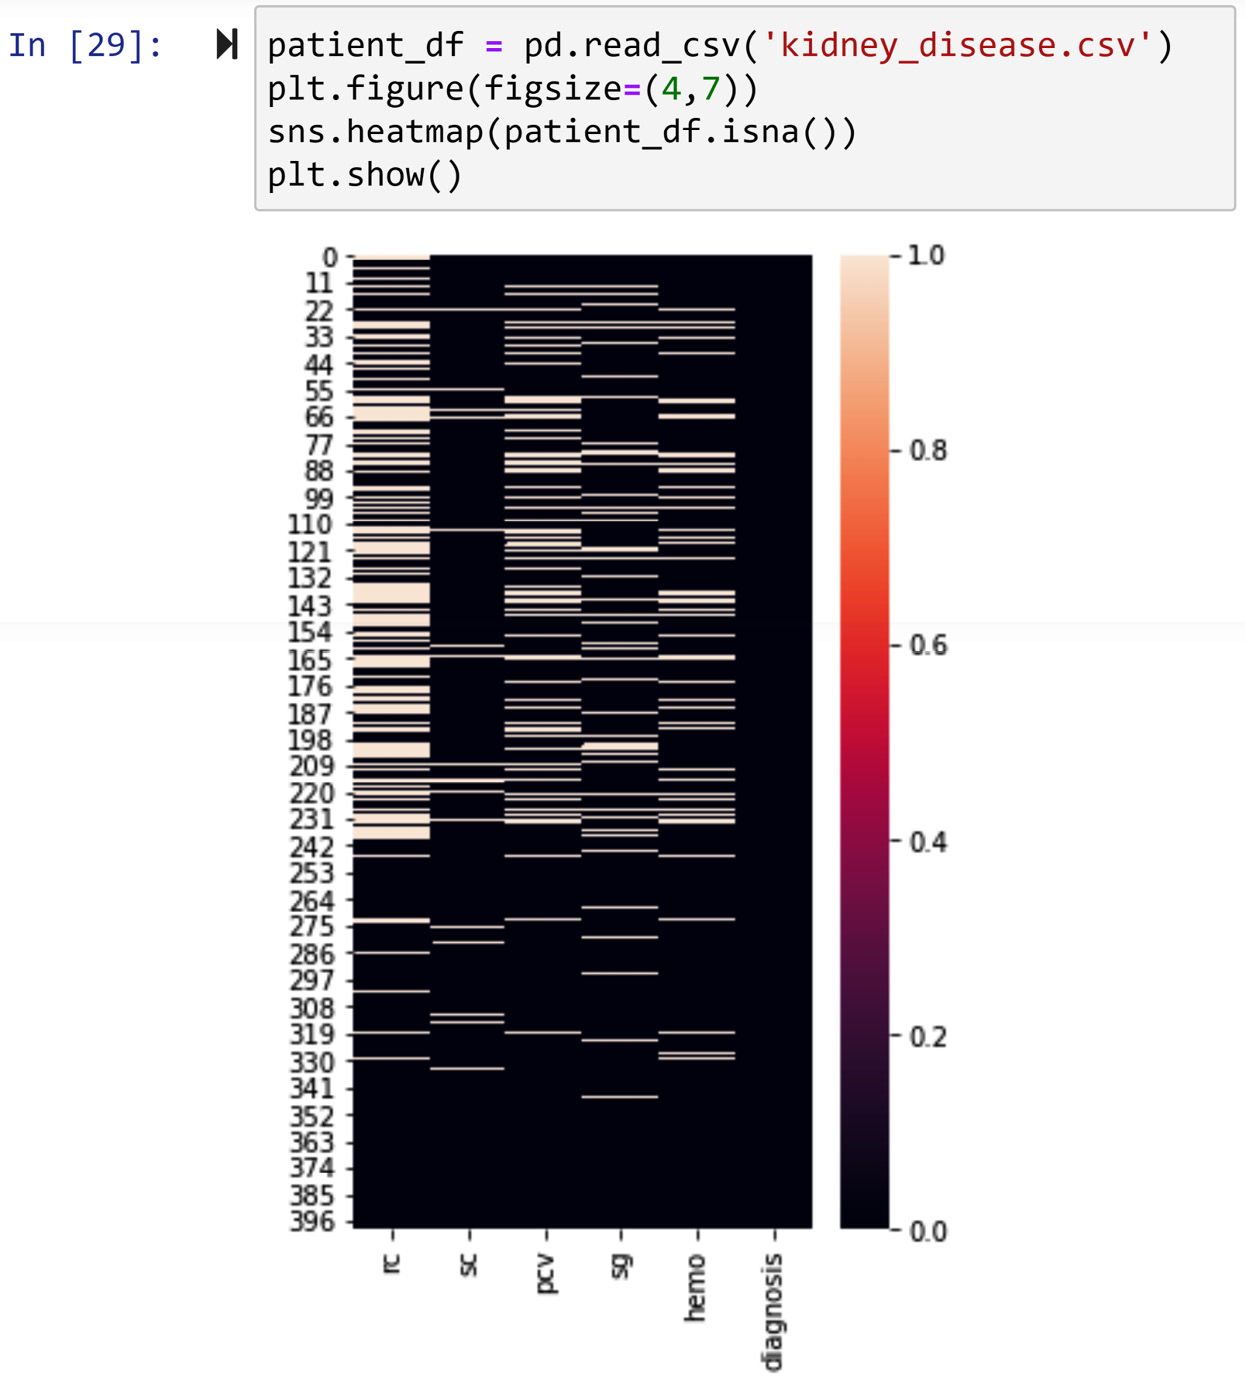 Figure 11.18 – Using seaborn to visualize missing values in kidney_disease.csv
